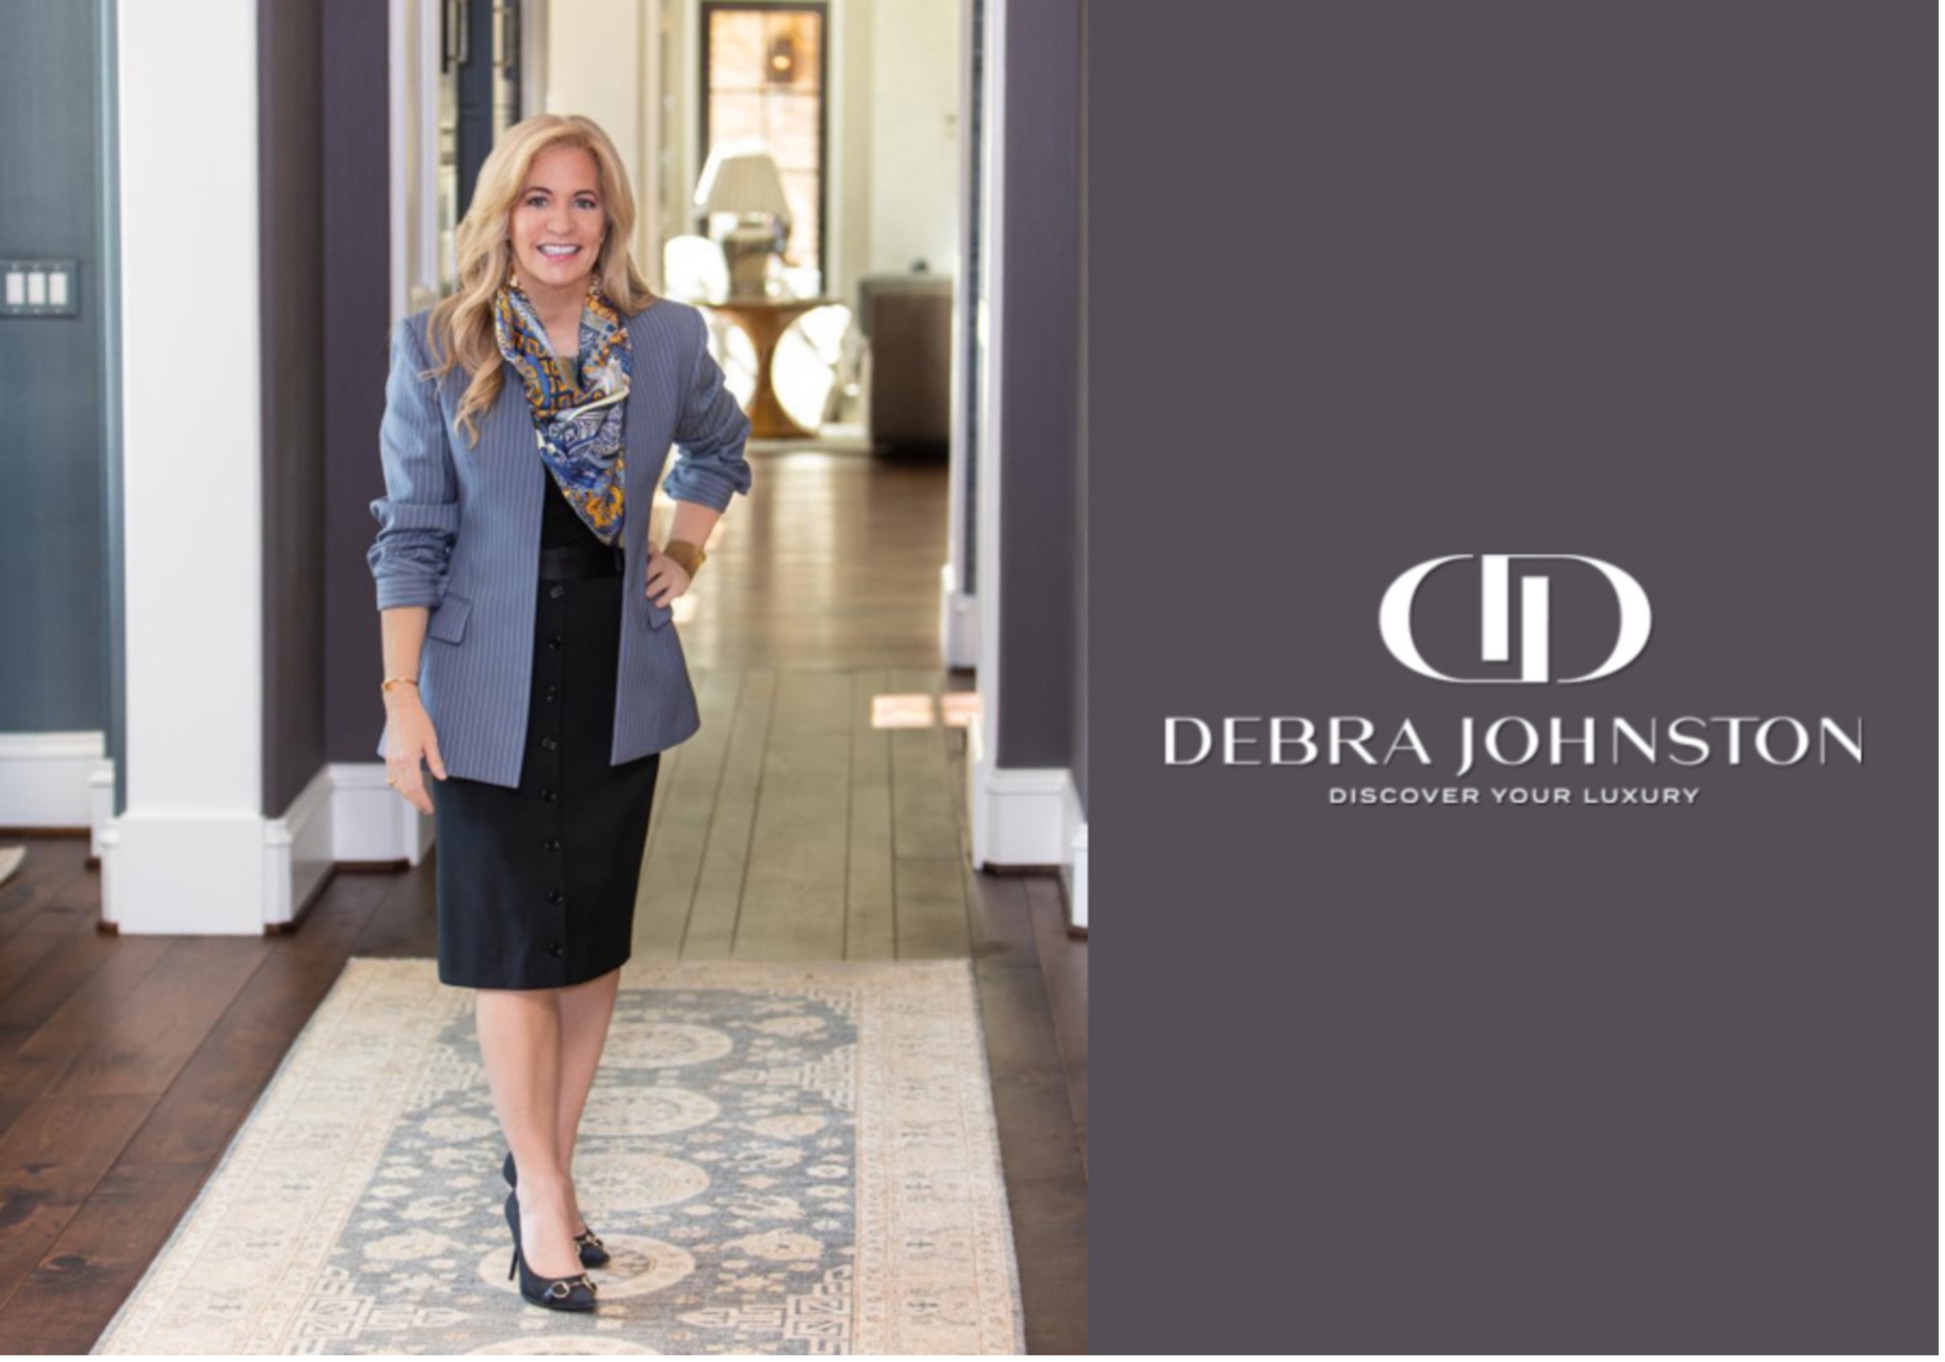 Debra Johnston - Coldwell Banker Realty, Monday, September 12, 2022, Press release picture